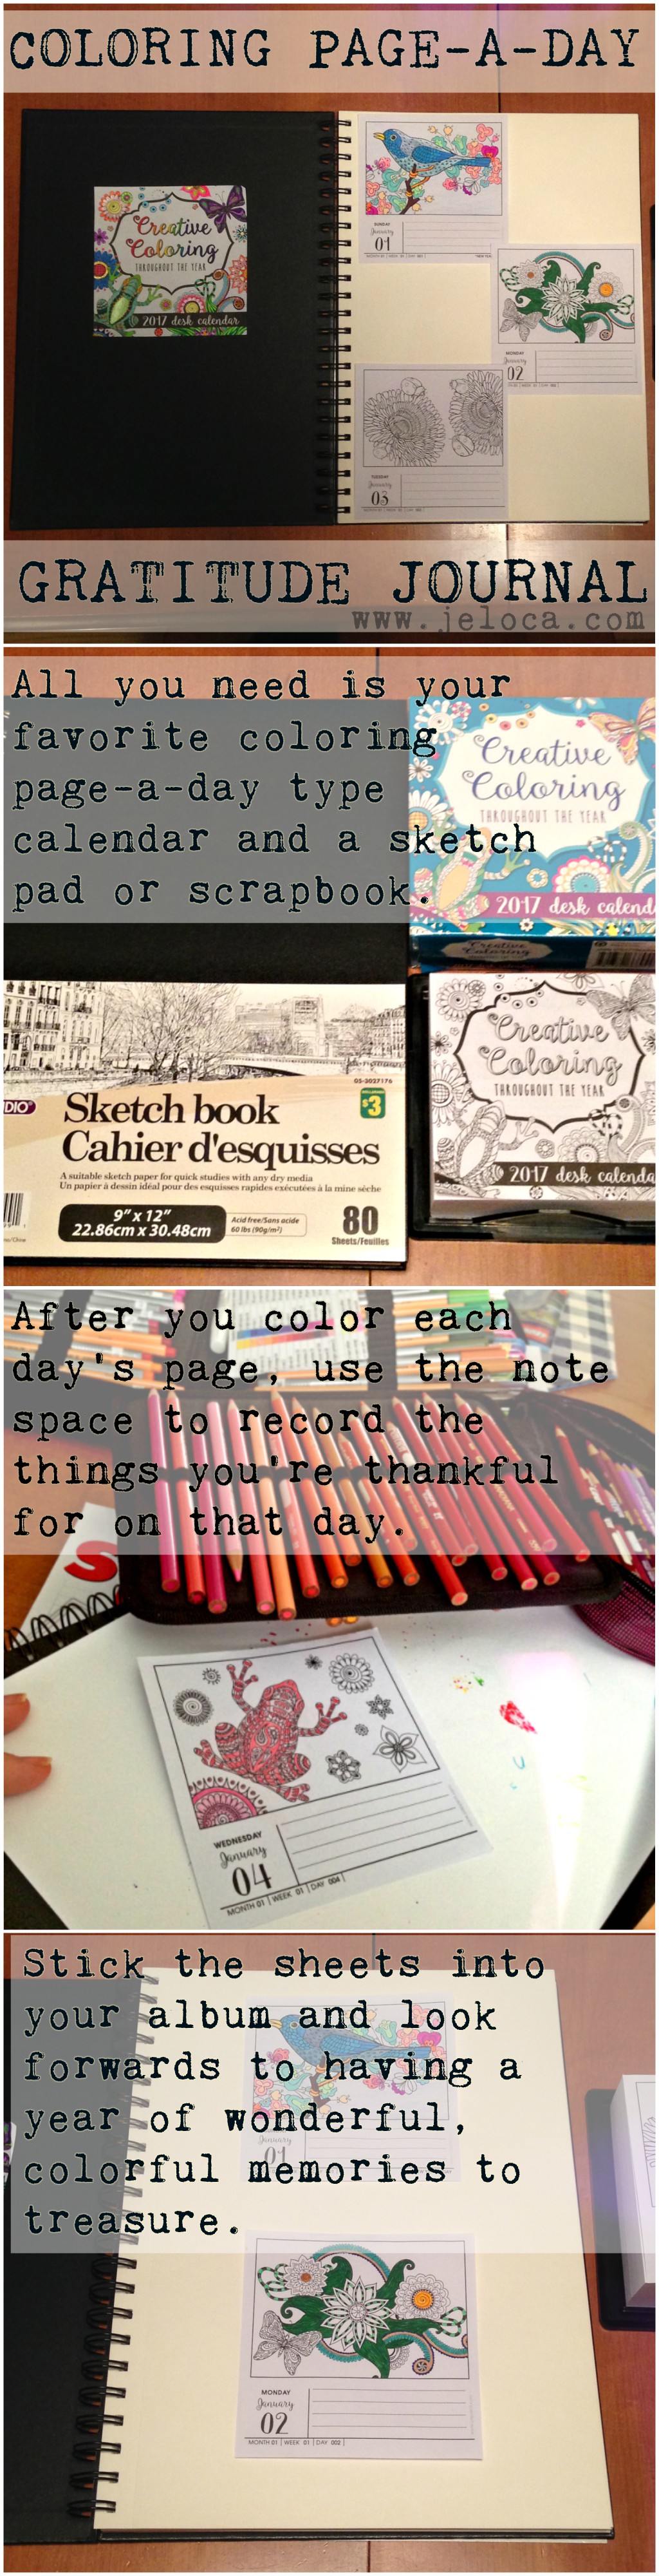 pinterest-stack-sited-coloring-page-a-day-gratitude-journal